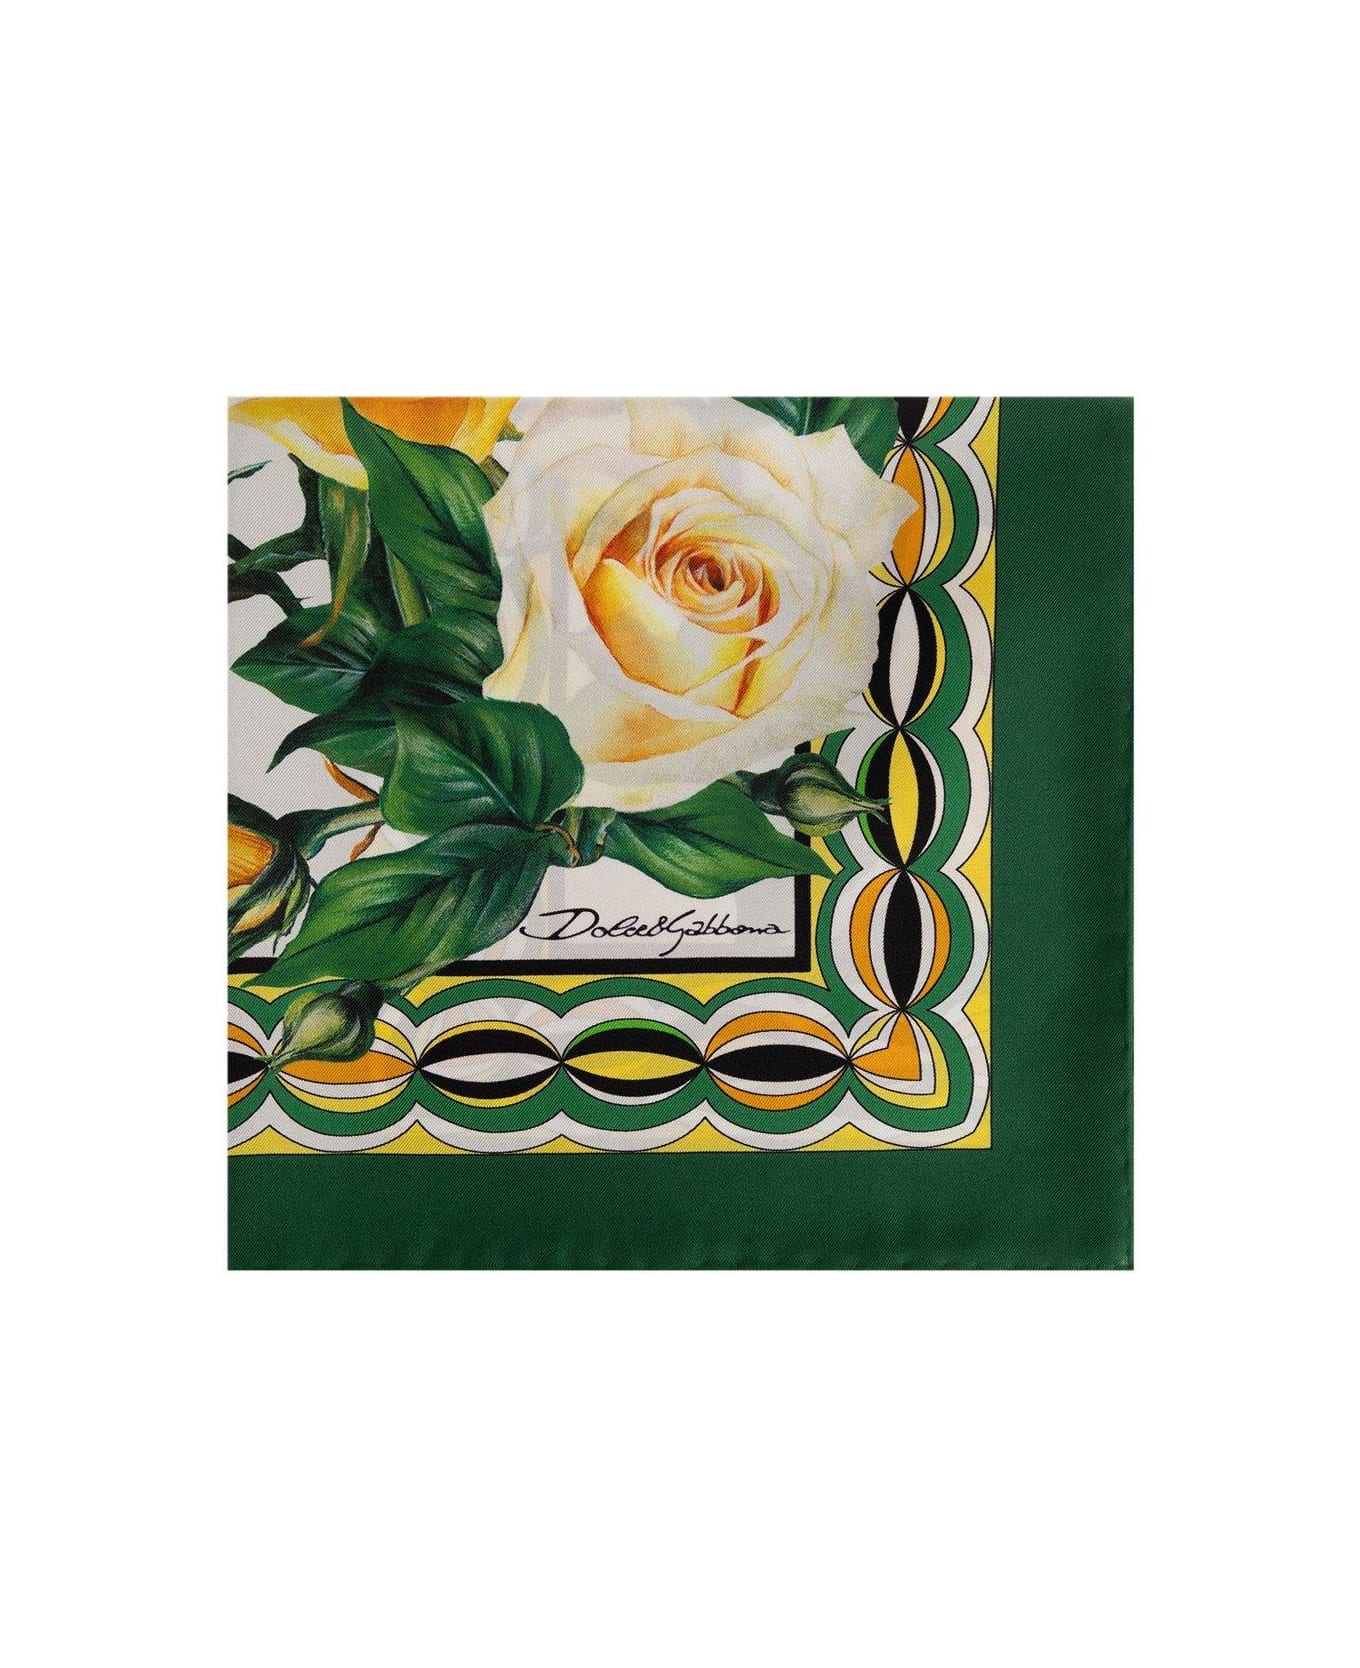 Dolce cable & Gabbana Rose Printed Twill Scarf - Giallo